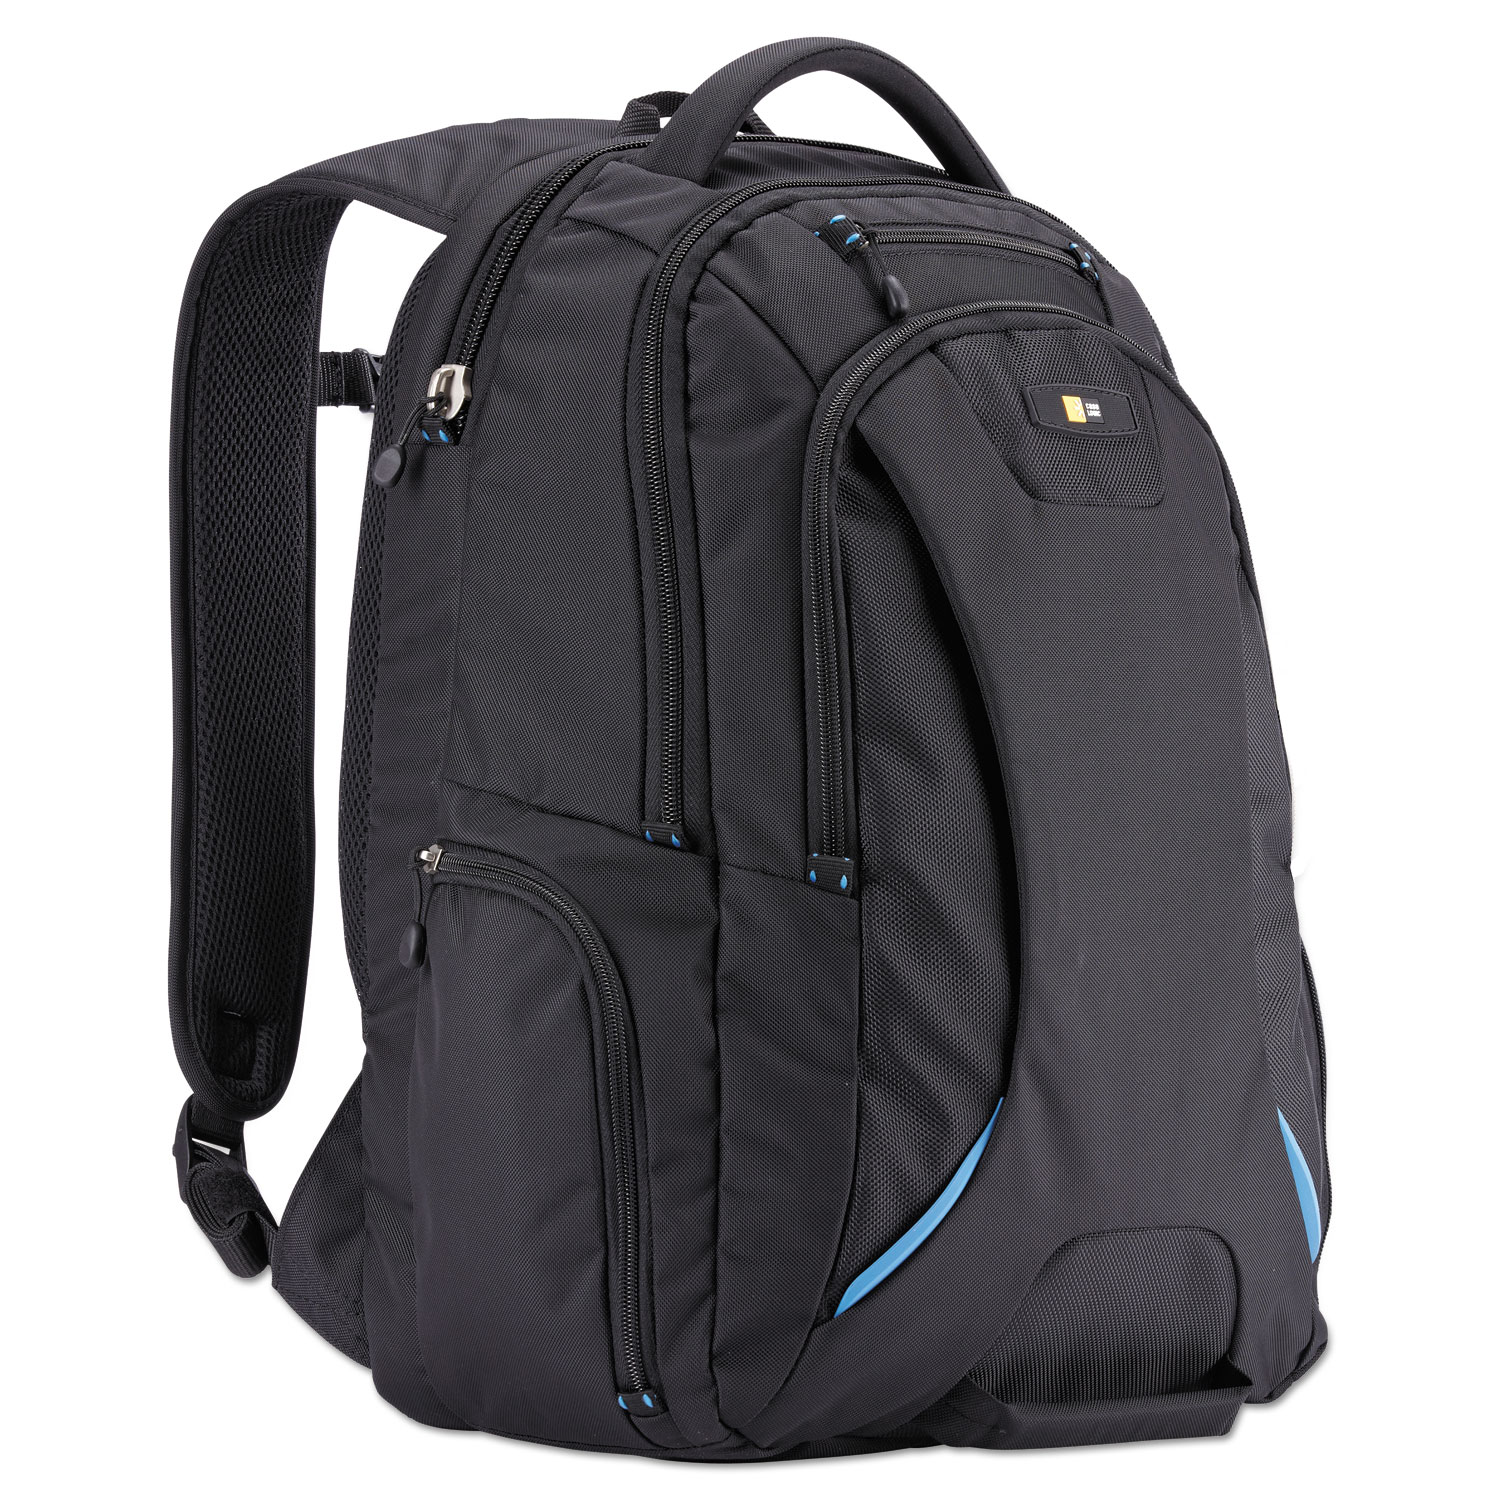  Case Logic 3203772 15.6 Checkpoint Friendly Backpack, 2.76 x 13.39 x 19.69, Polyester, Black (CLG3203772) 